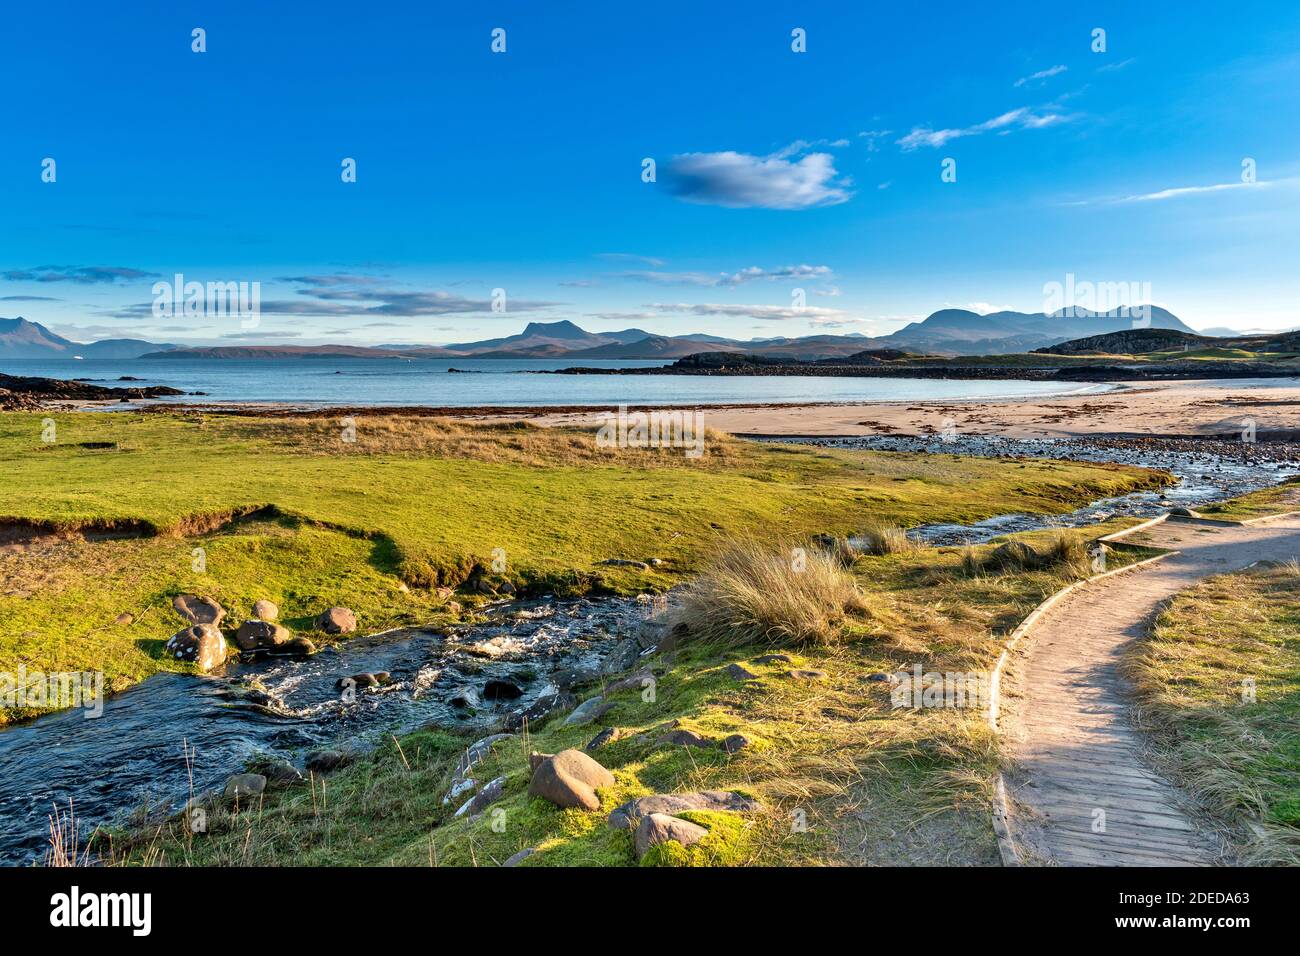 MELLON UDRIGLE ROSS-SHIRE HIGHLANDS SCOTLAND MORNING SUNSHINE BOARDWALK AND STREAM LEADING TO THE BEACH AND VIEW TO MOUNTAIN RANGES Stock Photo